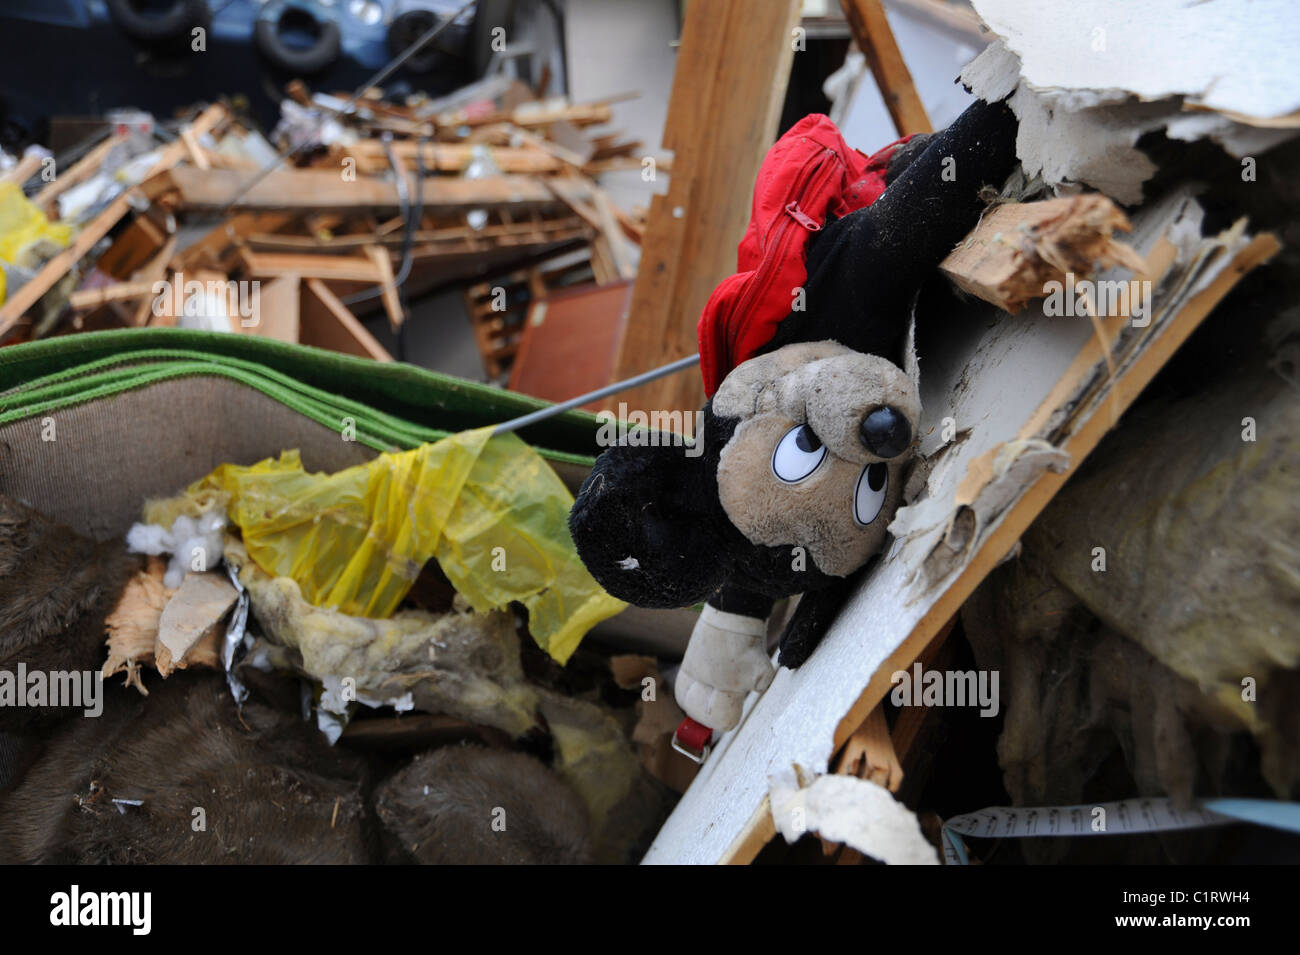 A child's Mickey Mouse doll lies in tatters among debris in Ofunato, Japan, following the March 2011 earthquake + tsunami. Stock Photo